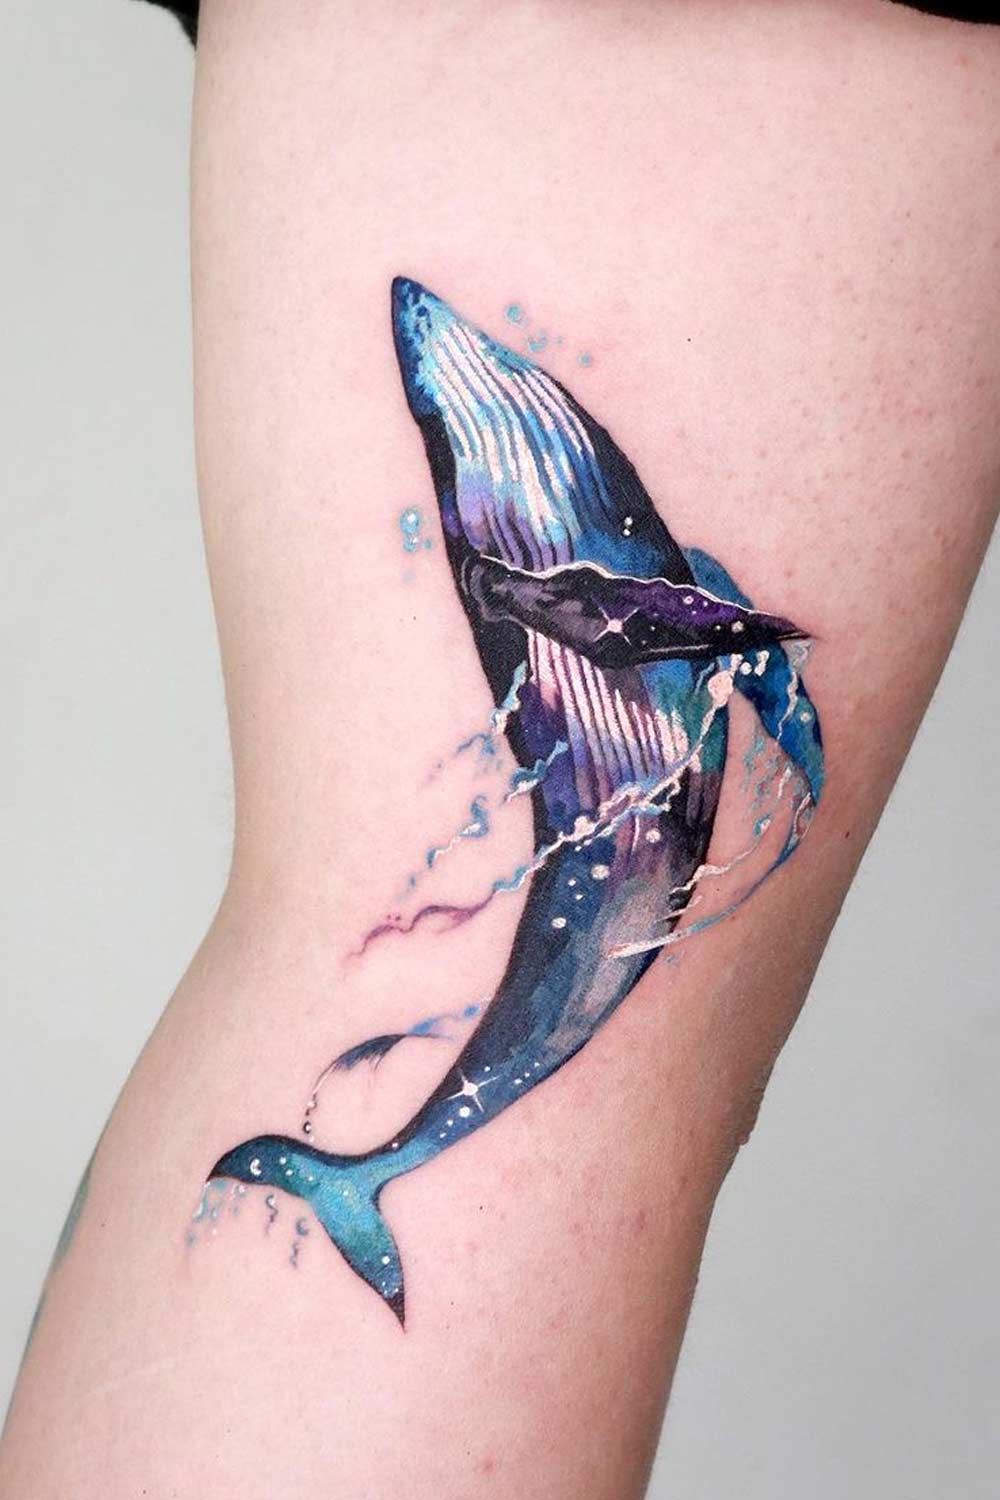 Tattoo of a Whale